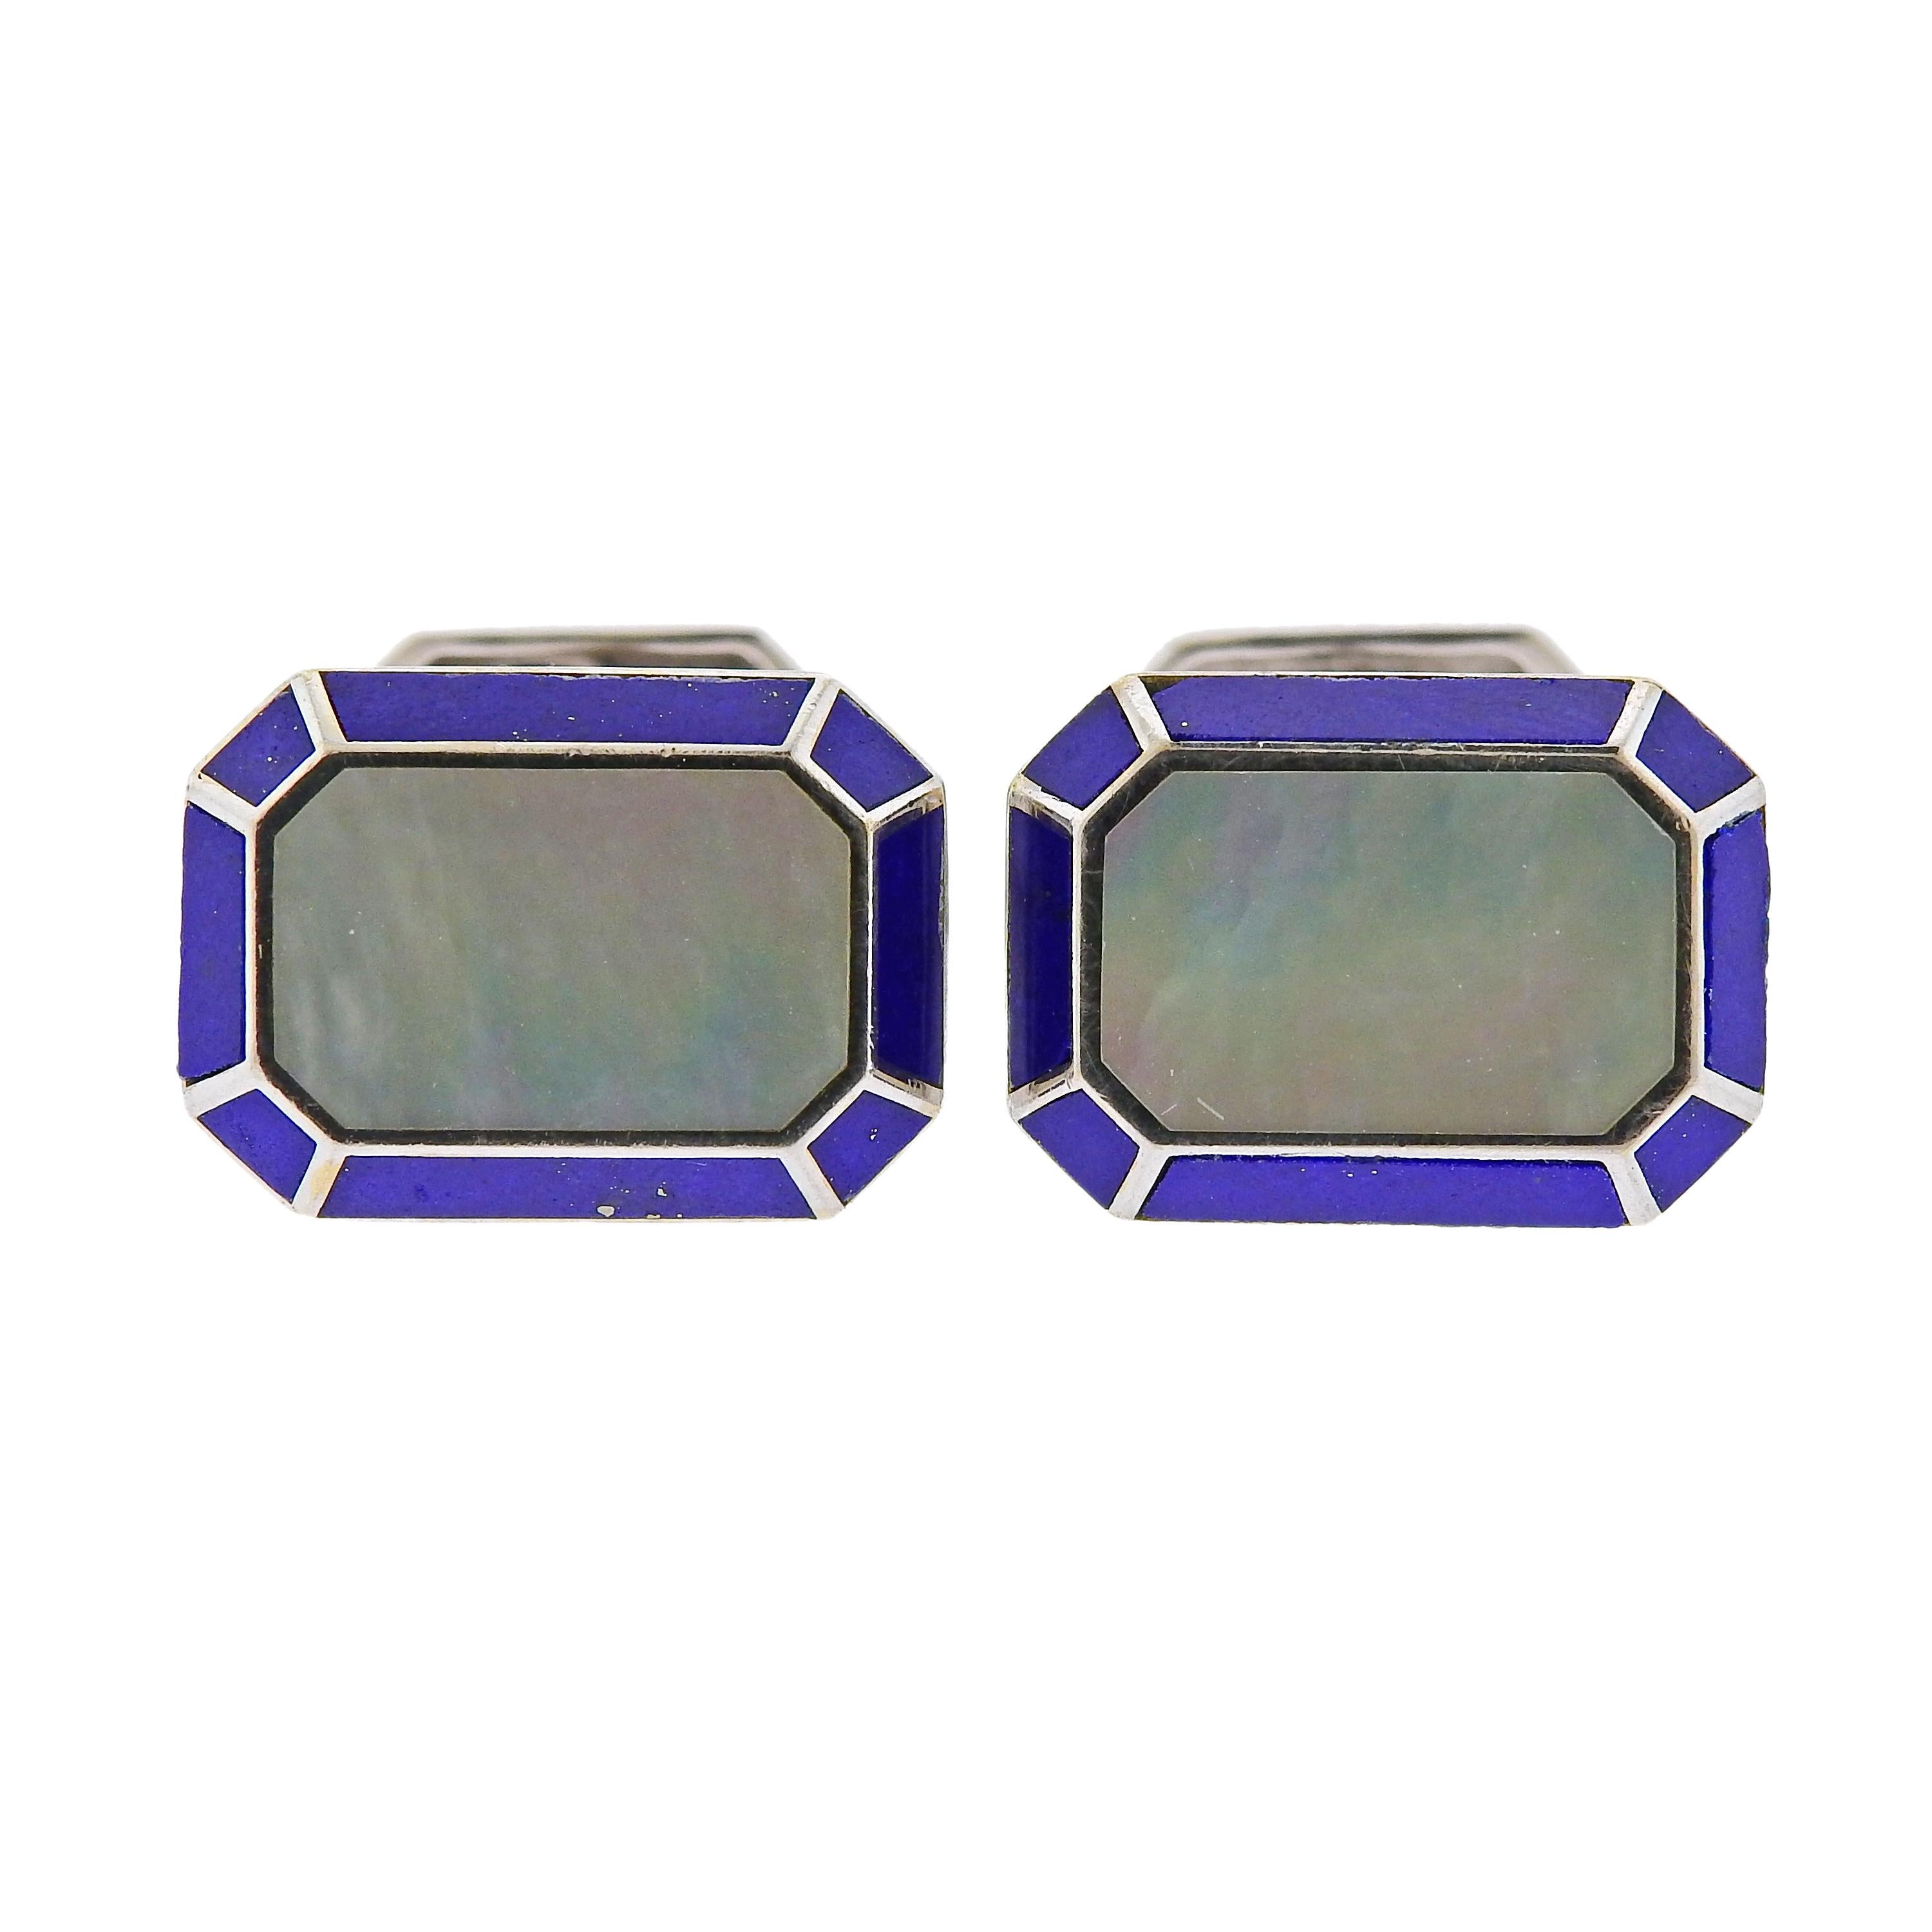 Pair of 18k white gold classic cufflinks by Harry Winston, set with mother of pearl and lapis top. Cufflink top is 18mm x 14mm, weigh 17.6 grams. Marked: HW, 750, 120682.